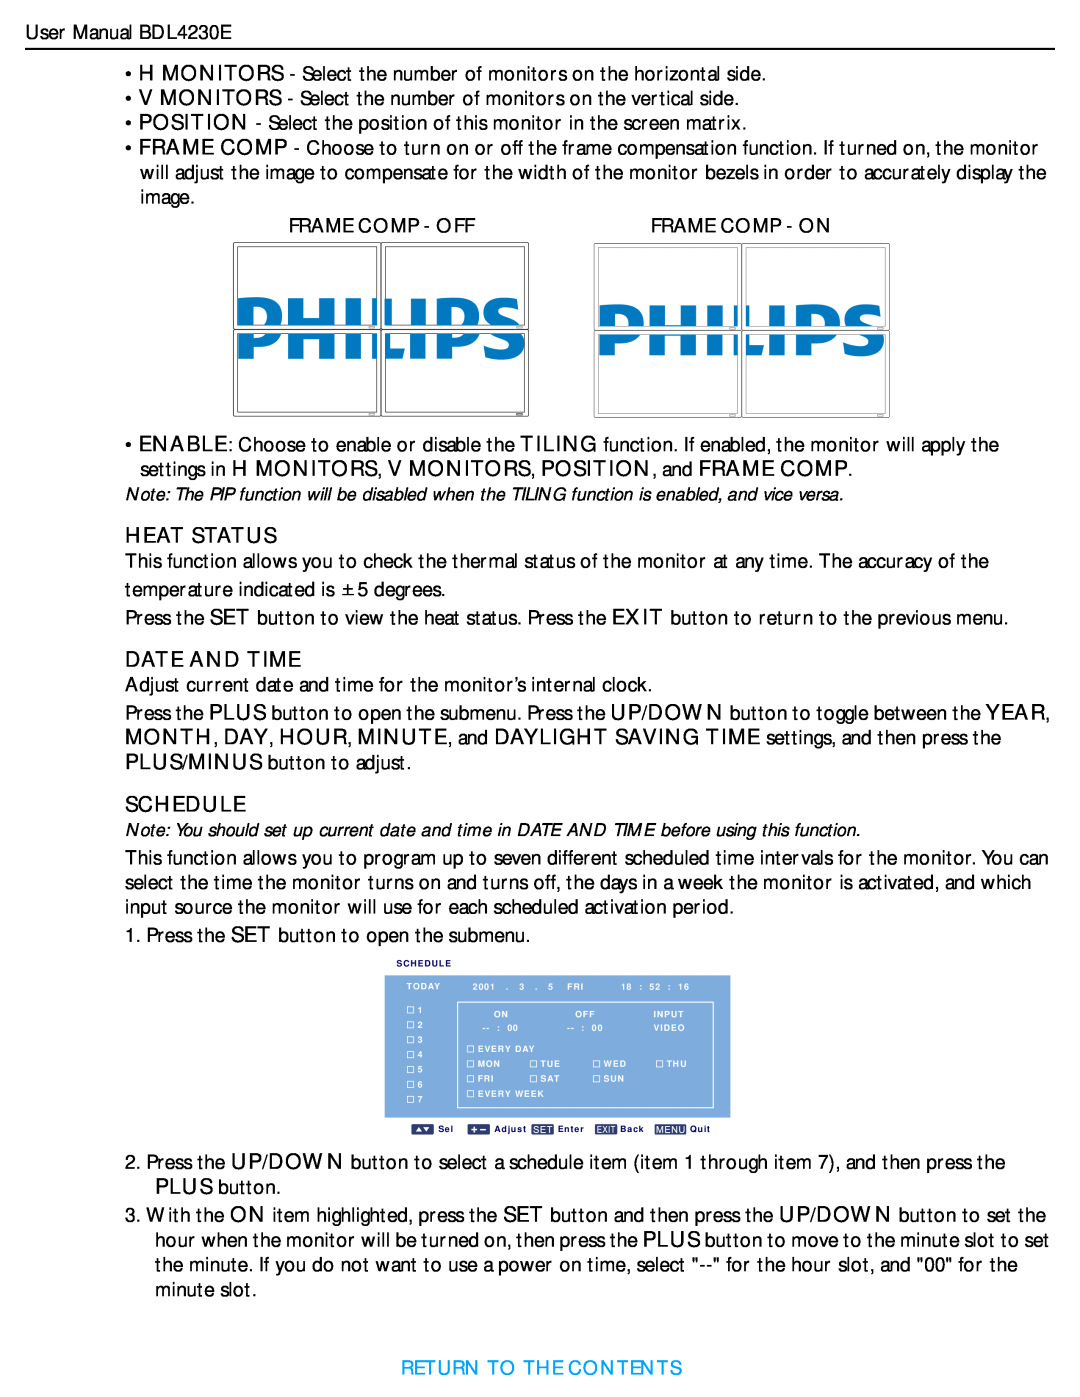 Philips BDL4230E user manual Heat Status, Date And Time, Schedule, Return To The Contents 